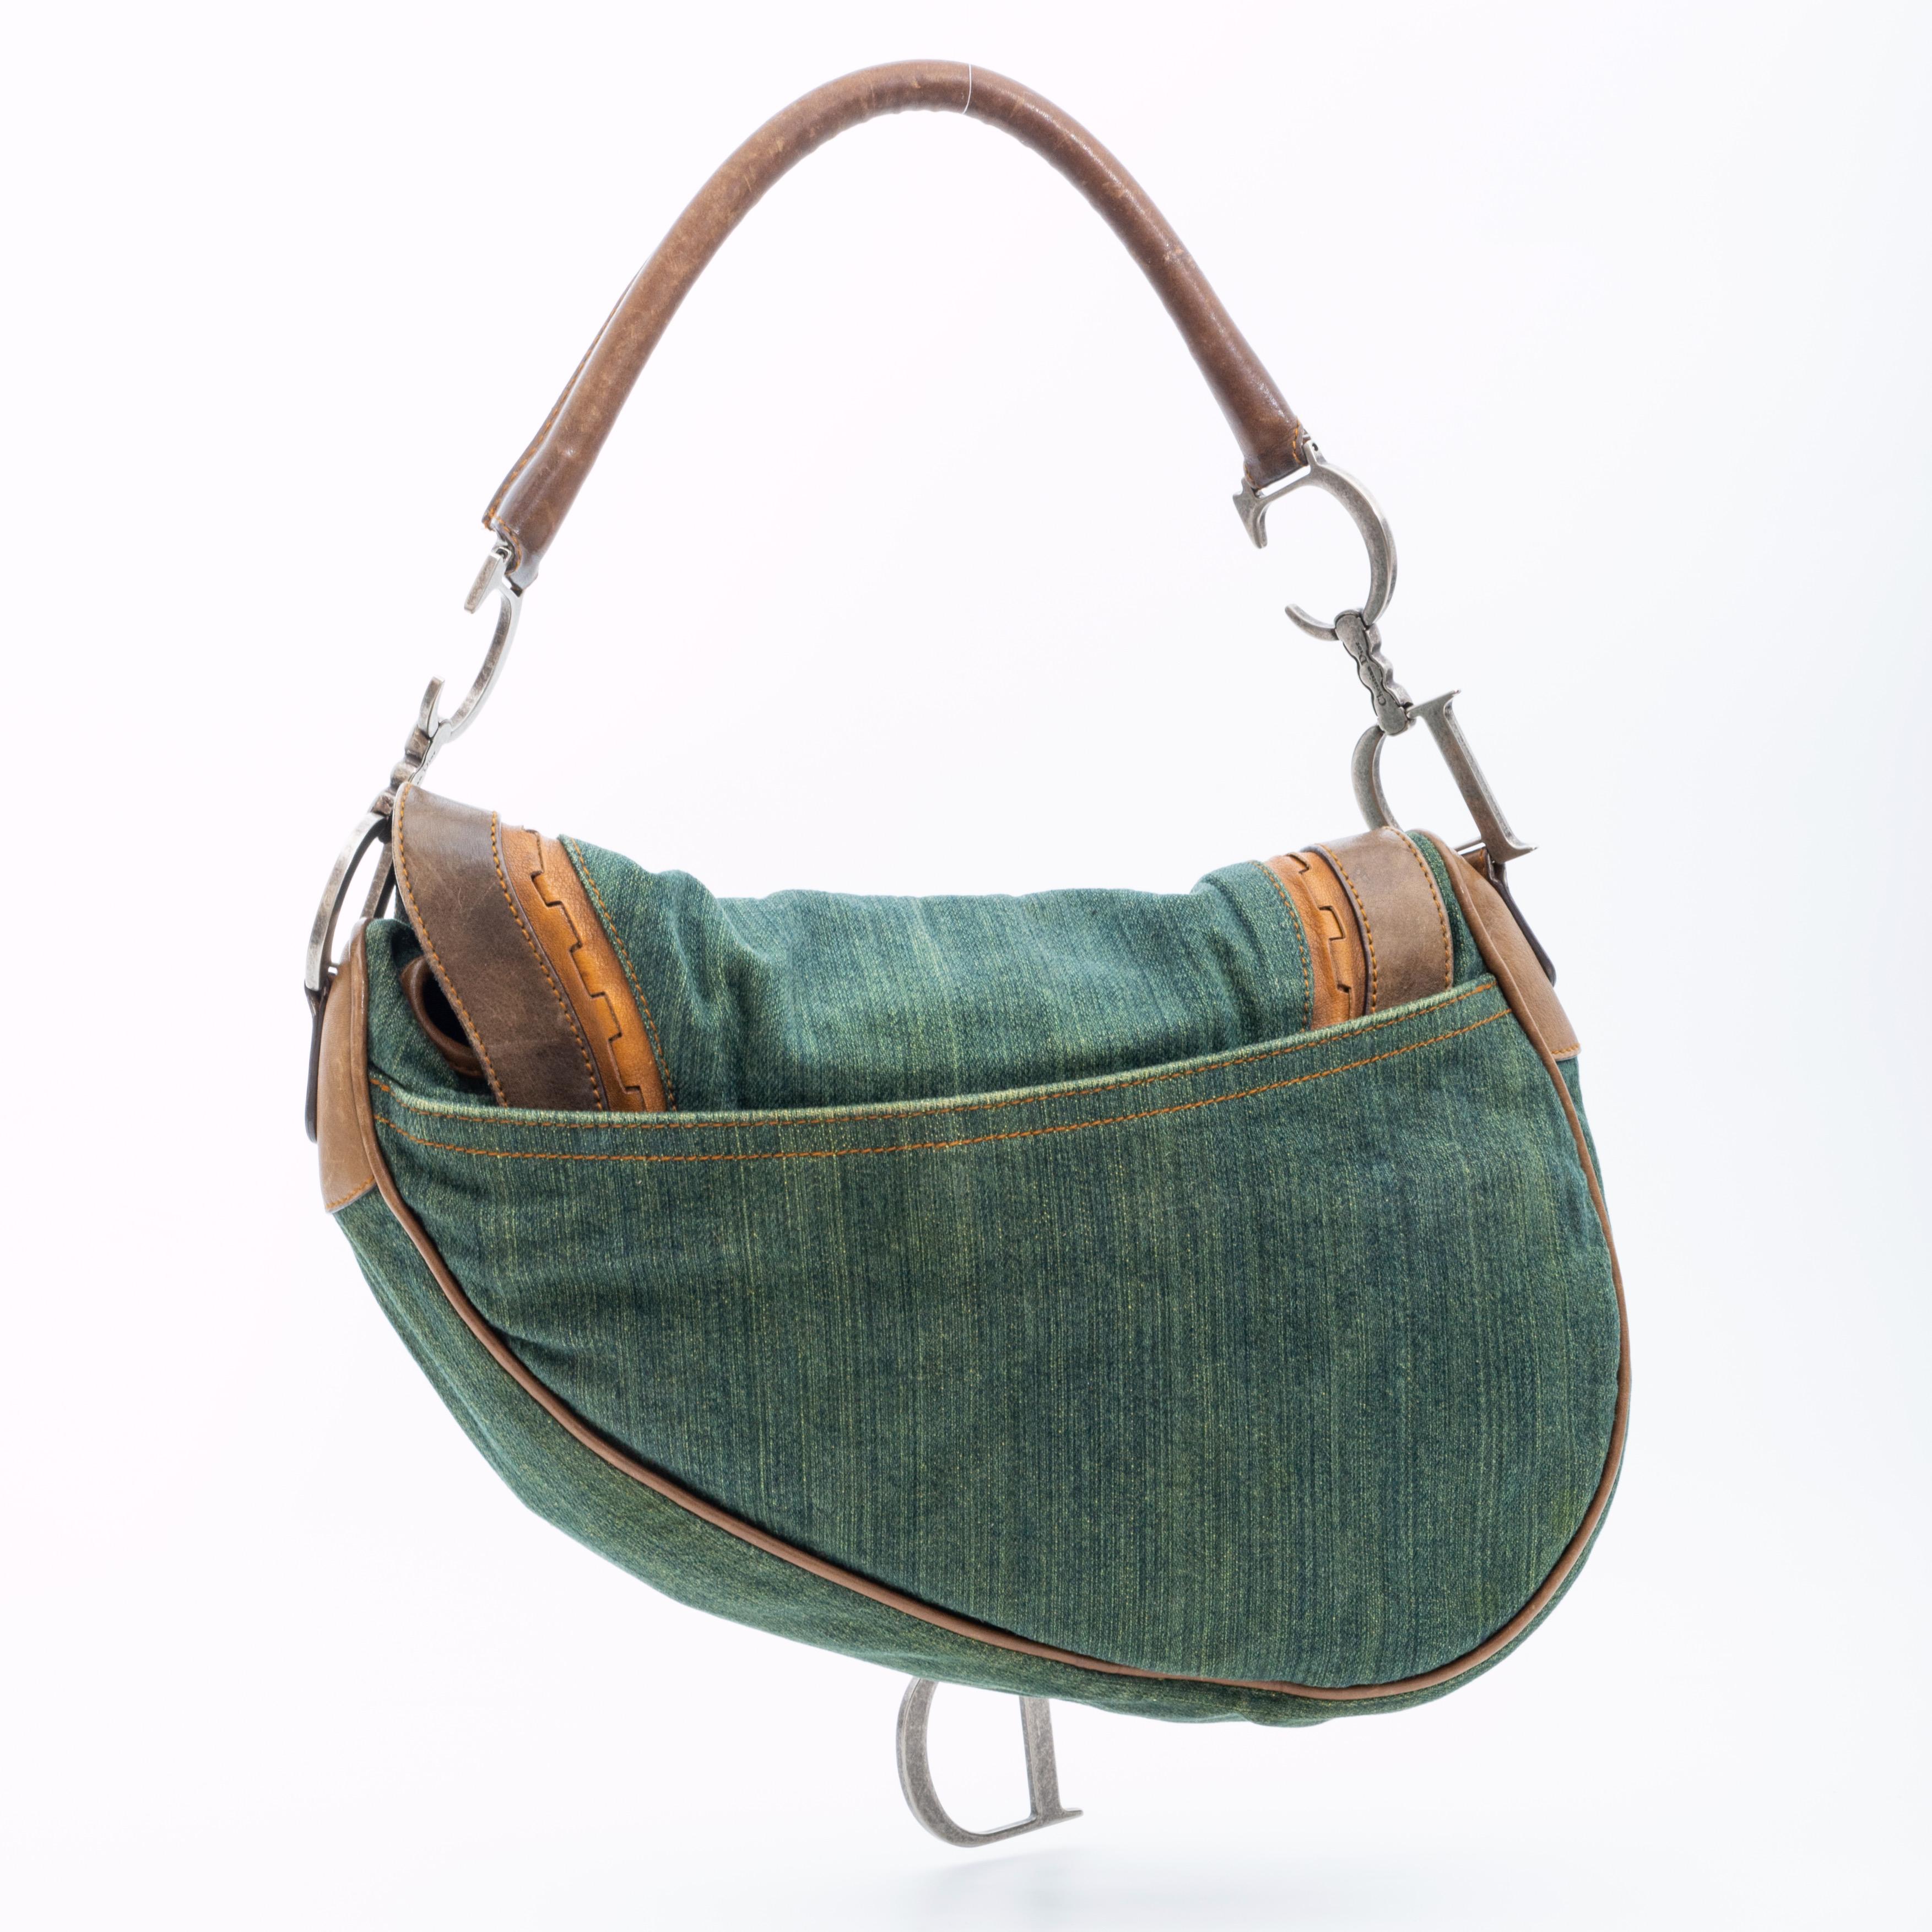 The bag is from 2006 and is made of supple washed green denim with aged calfskin trim and details. The bag features a fold over flap with a saddle shape, contrast stitching, antiqued silver metal hardware, monogram jacquard black fabric and an